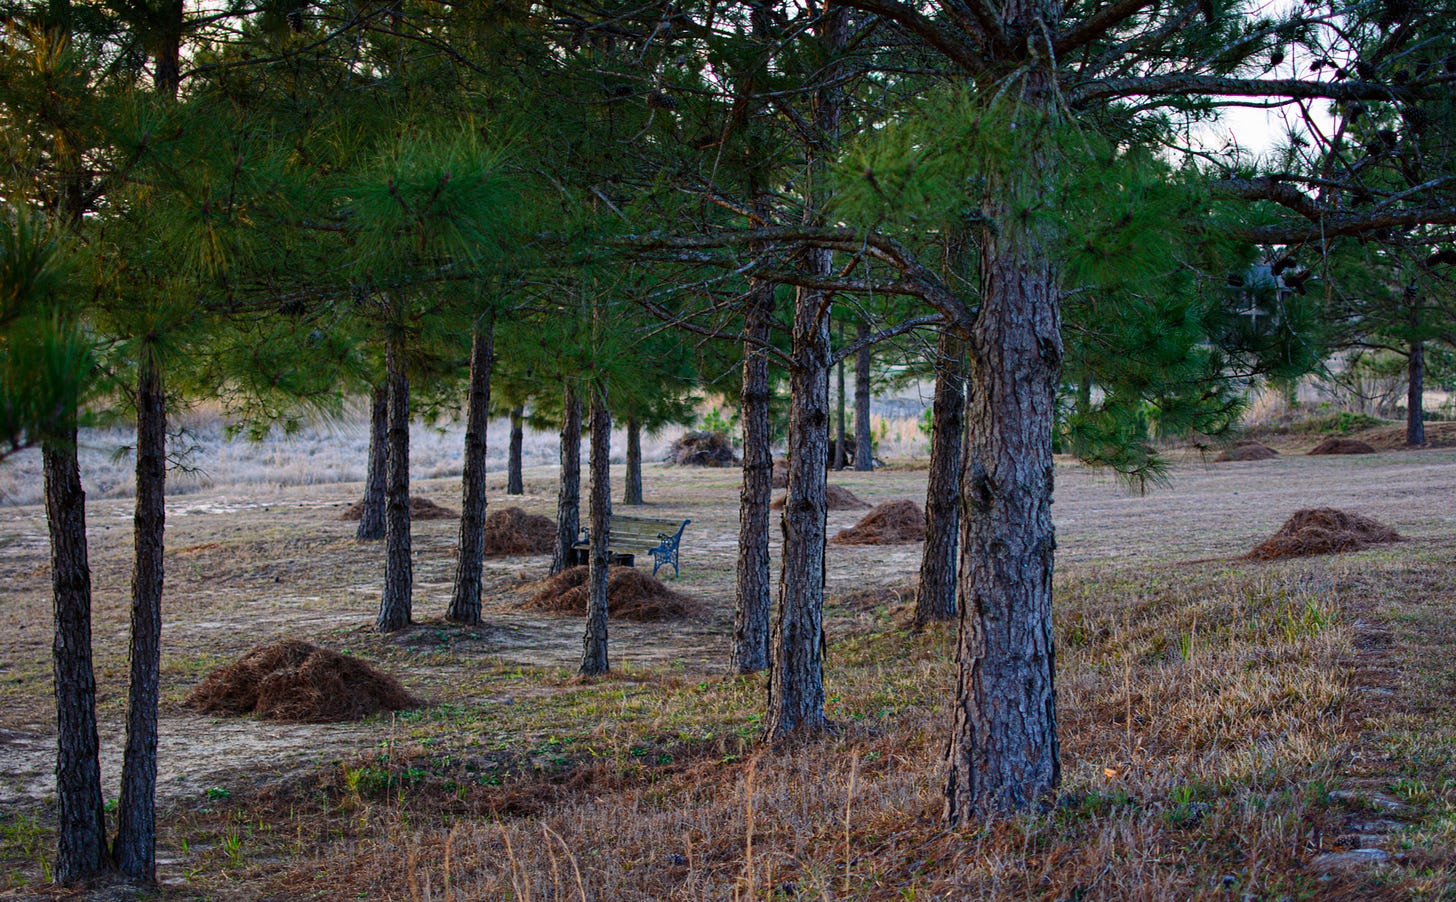 a group of pine trees with piles of raked pine needles below them and  bench in the center of the scene